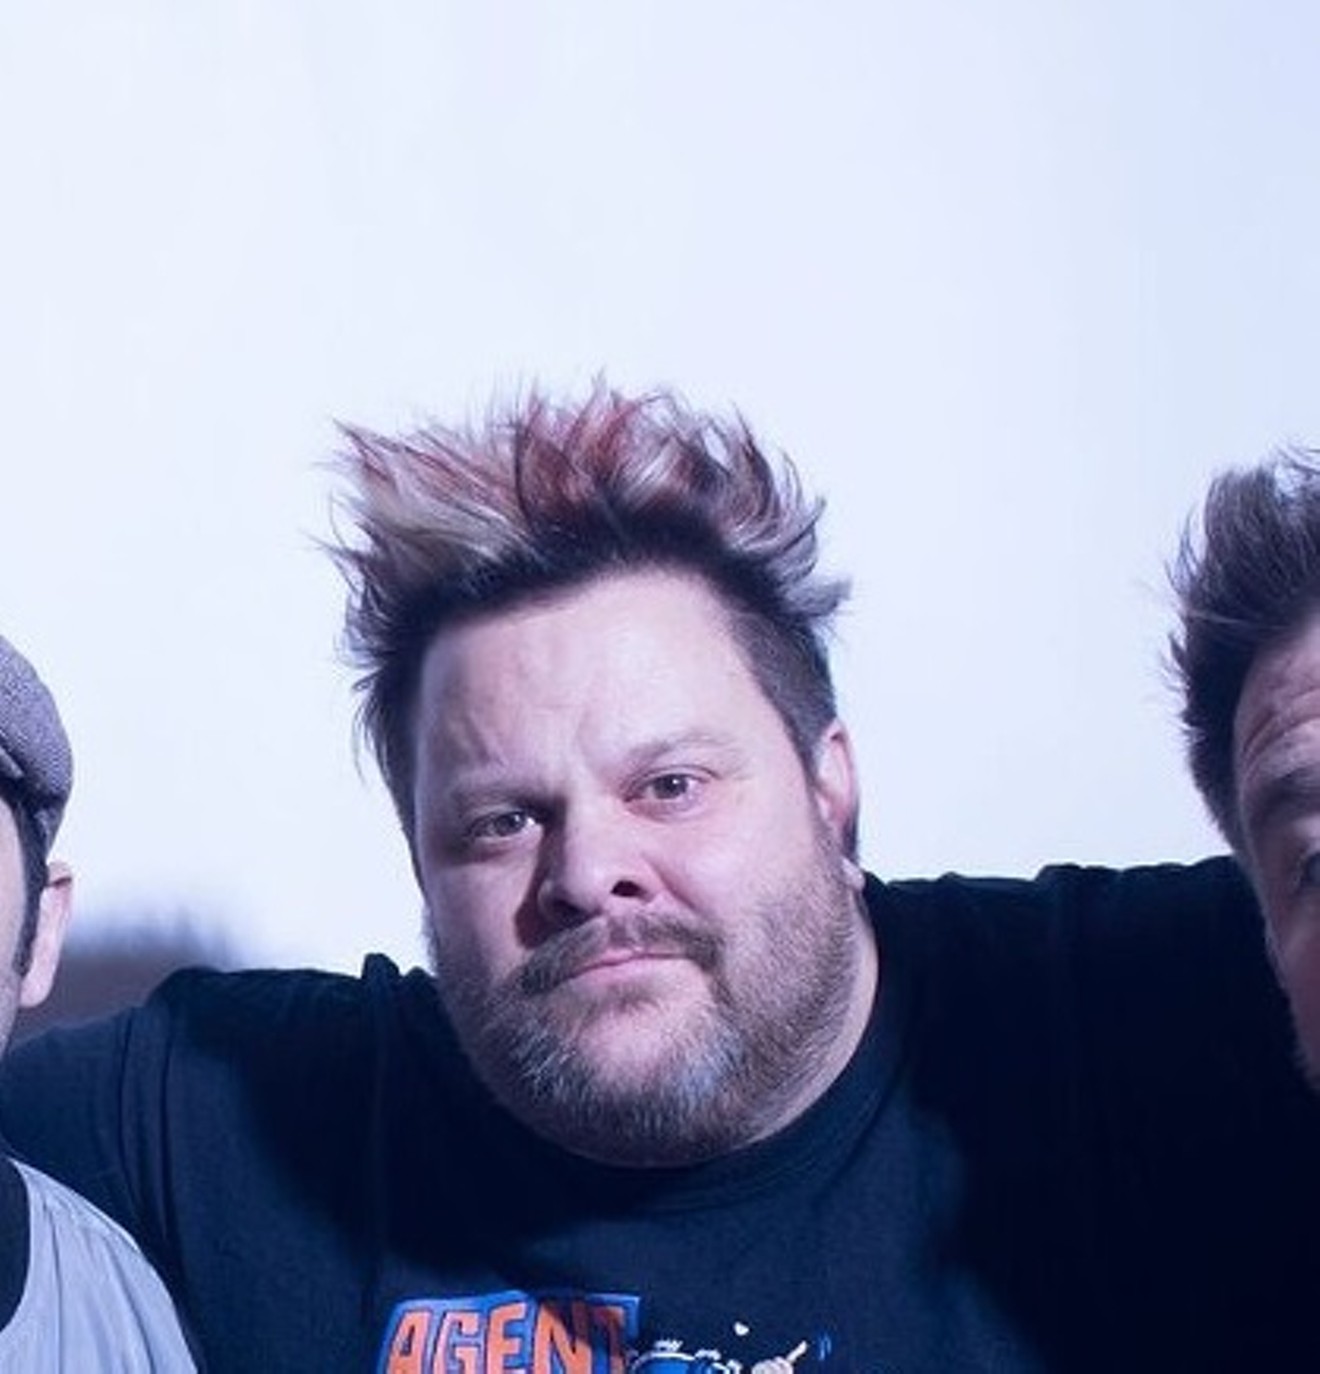 Singer Jaret Reddick from Bowling for Soup has a new podcast about movies and he's bringing it to life at Lava Cantina.